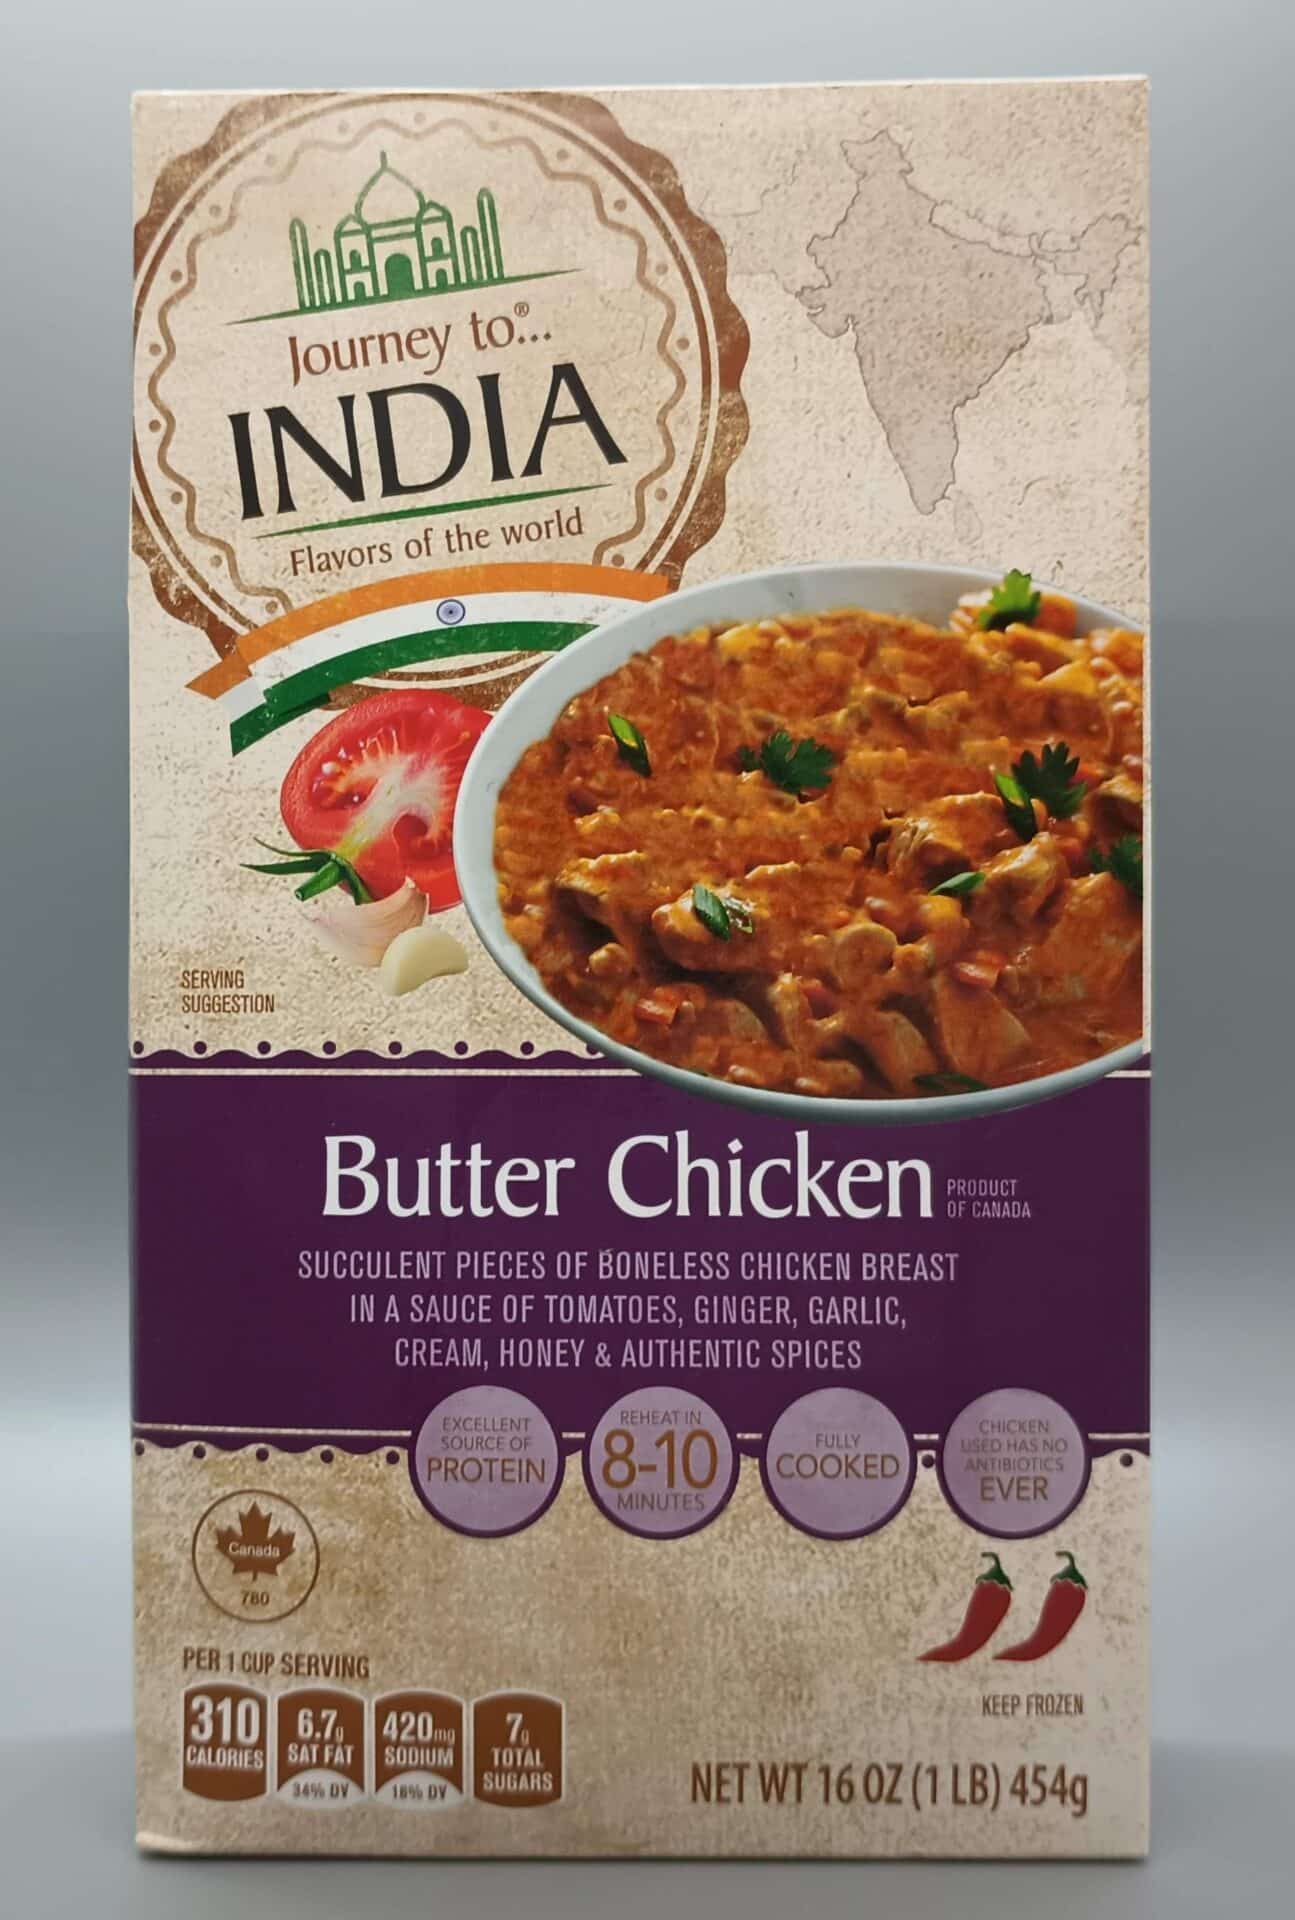 Journey to India Butter Chicken